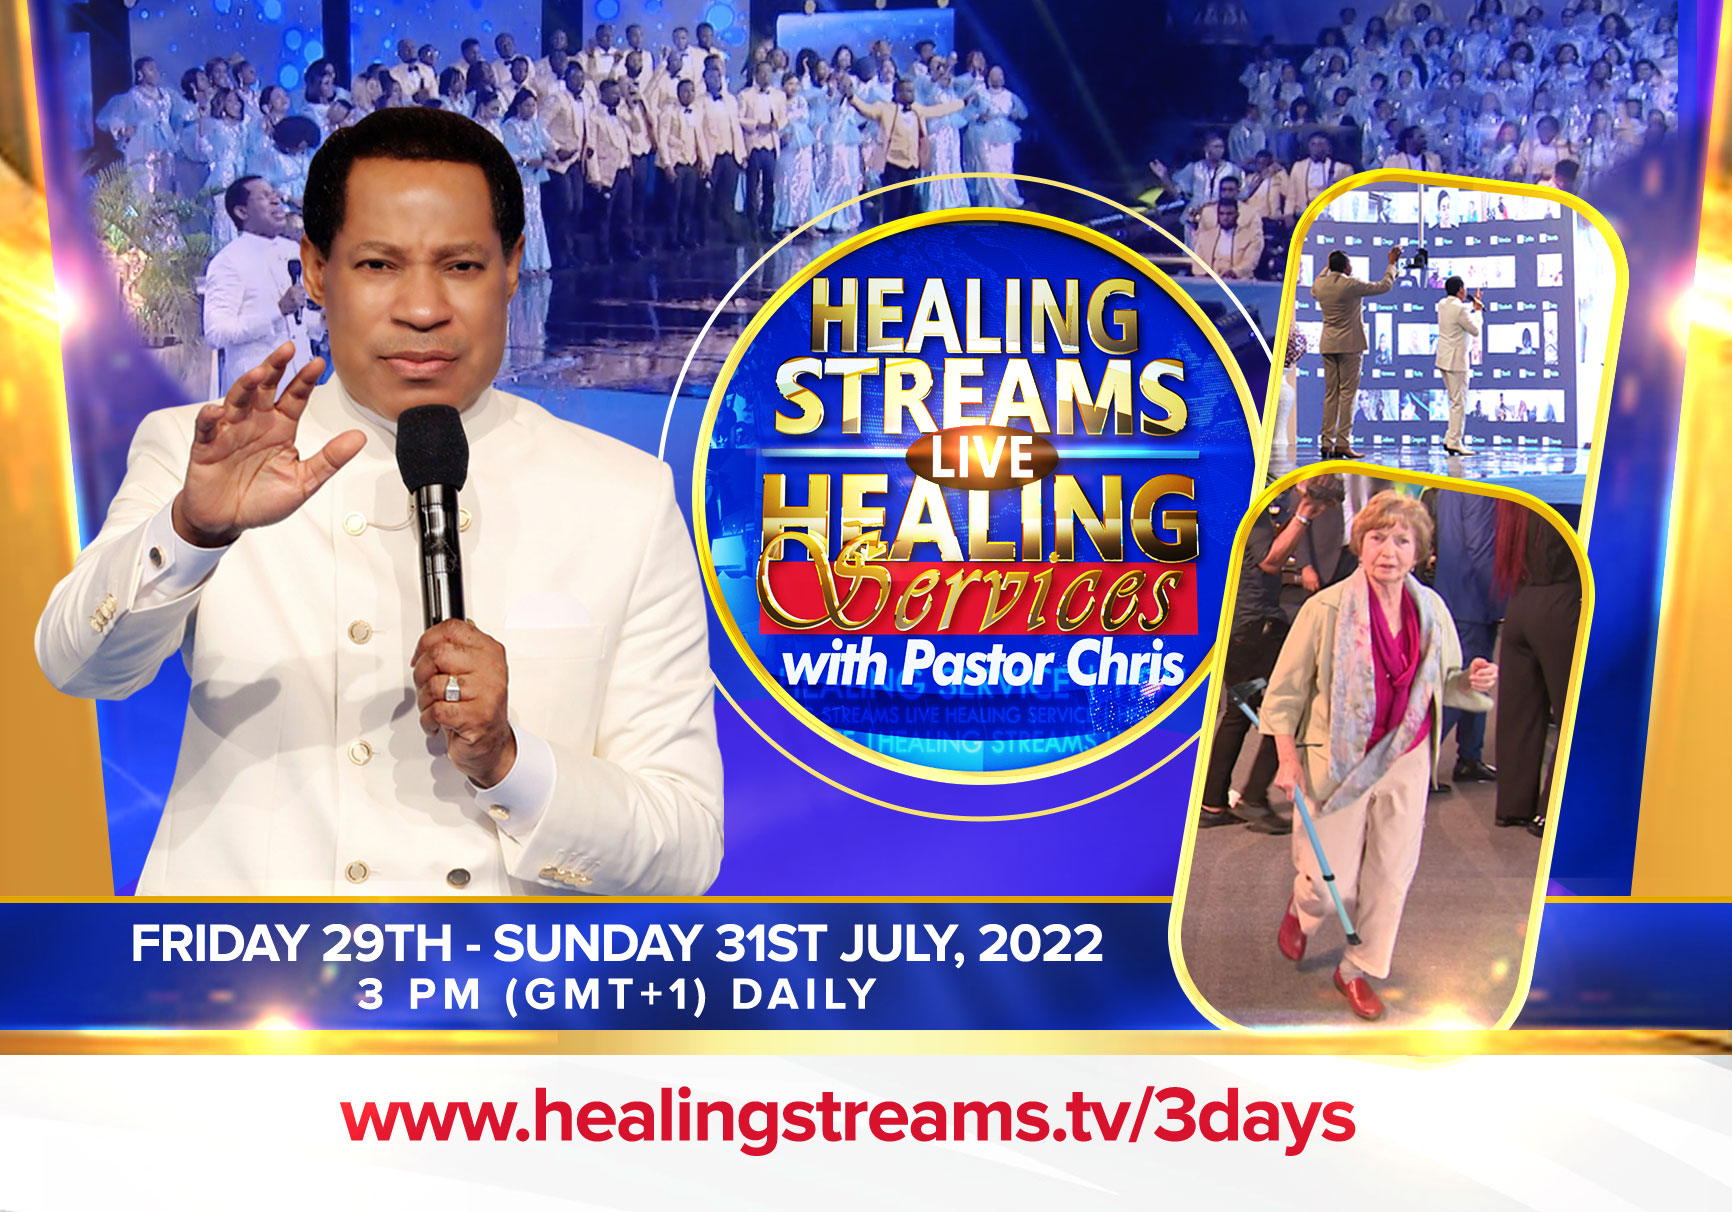 A CARNIVAL OF MIRACLES AT THE UPCOMING JULY 2022 HEALING STREAMS LIVE HEALING SERVICES WITH PASTOR C